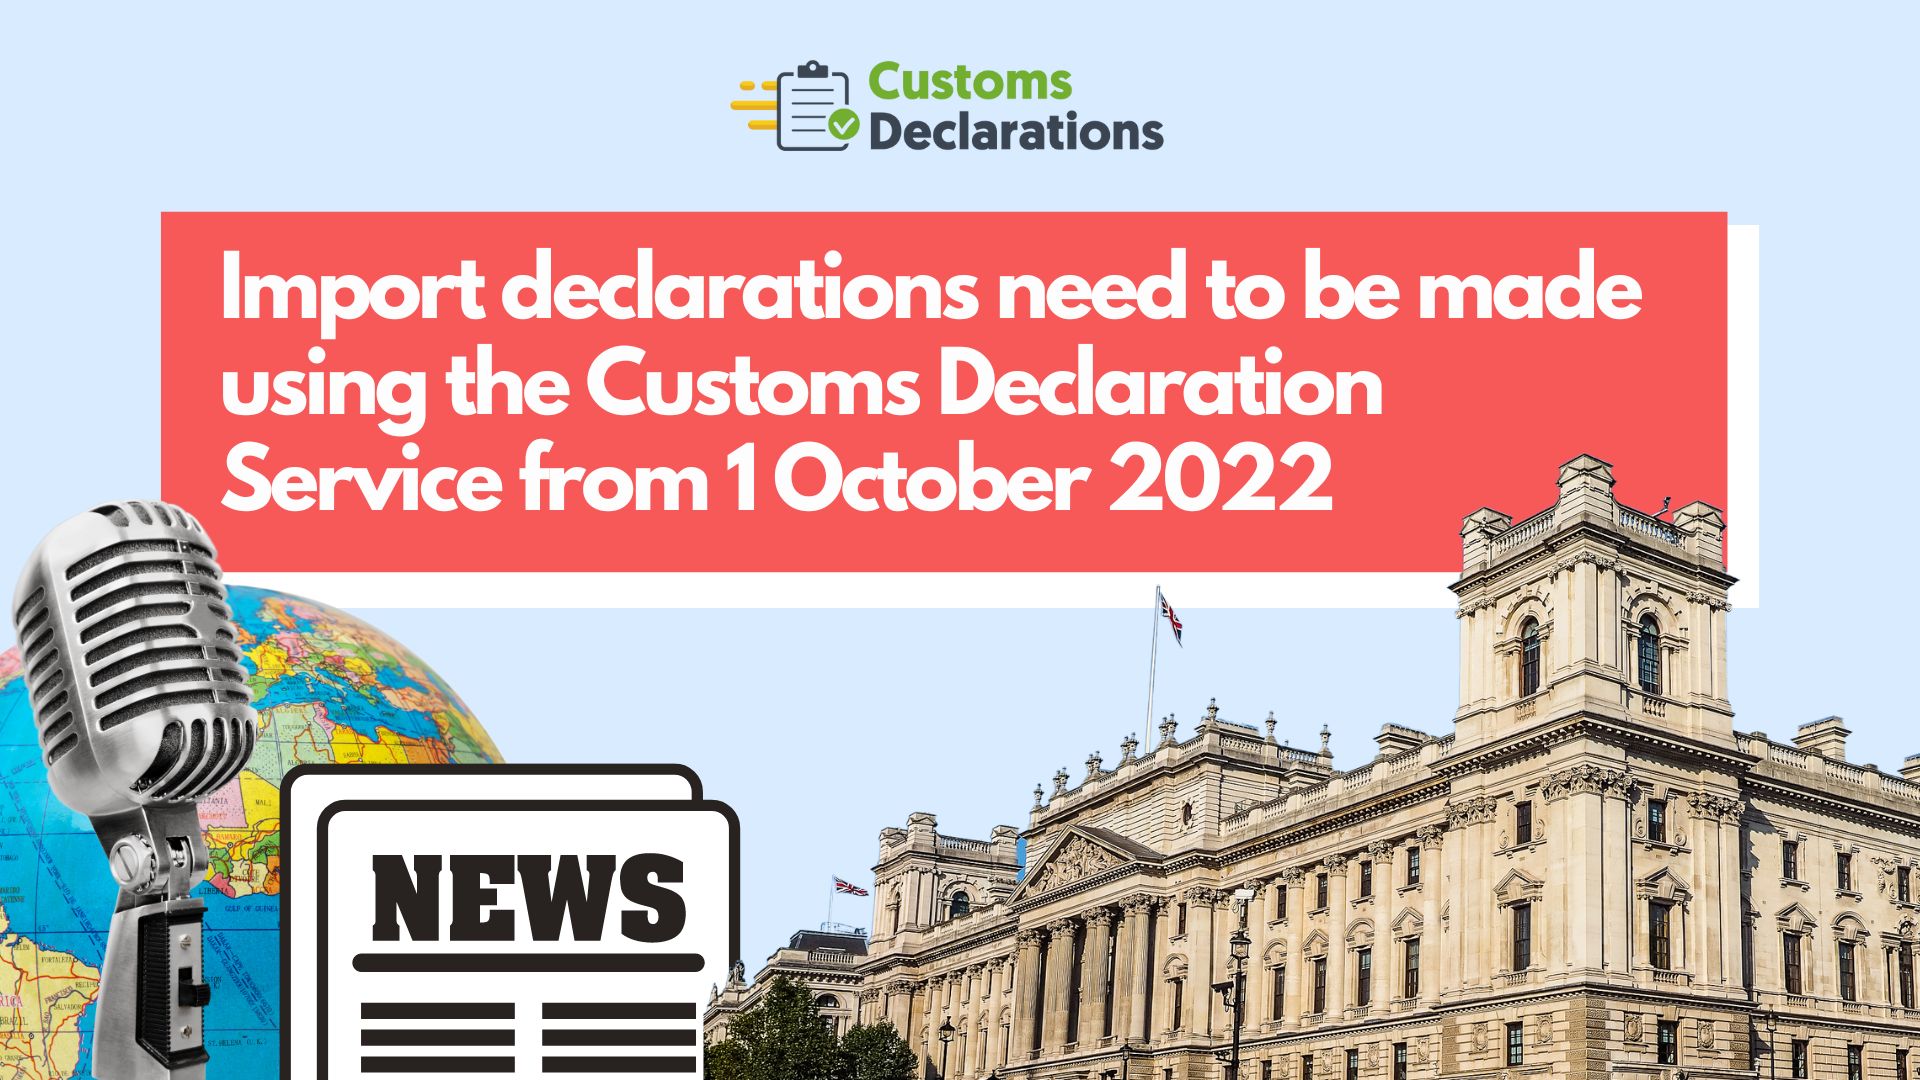 Import declarations need to be made using the Customs Declaration Service from 1 October 2022